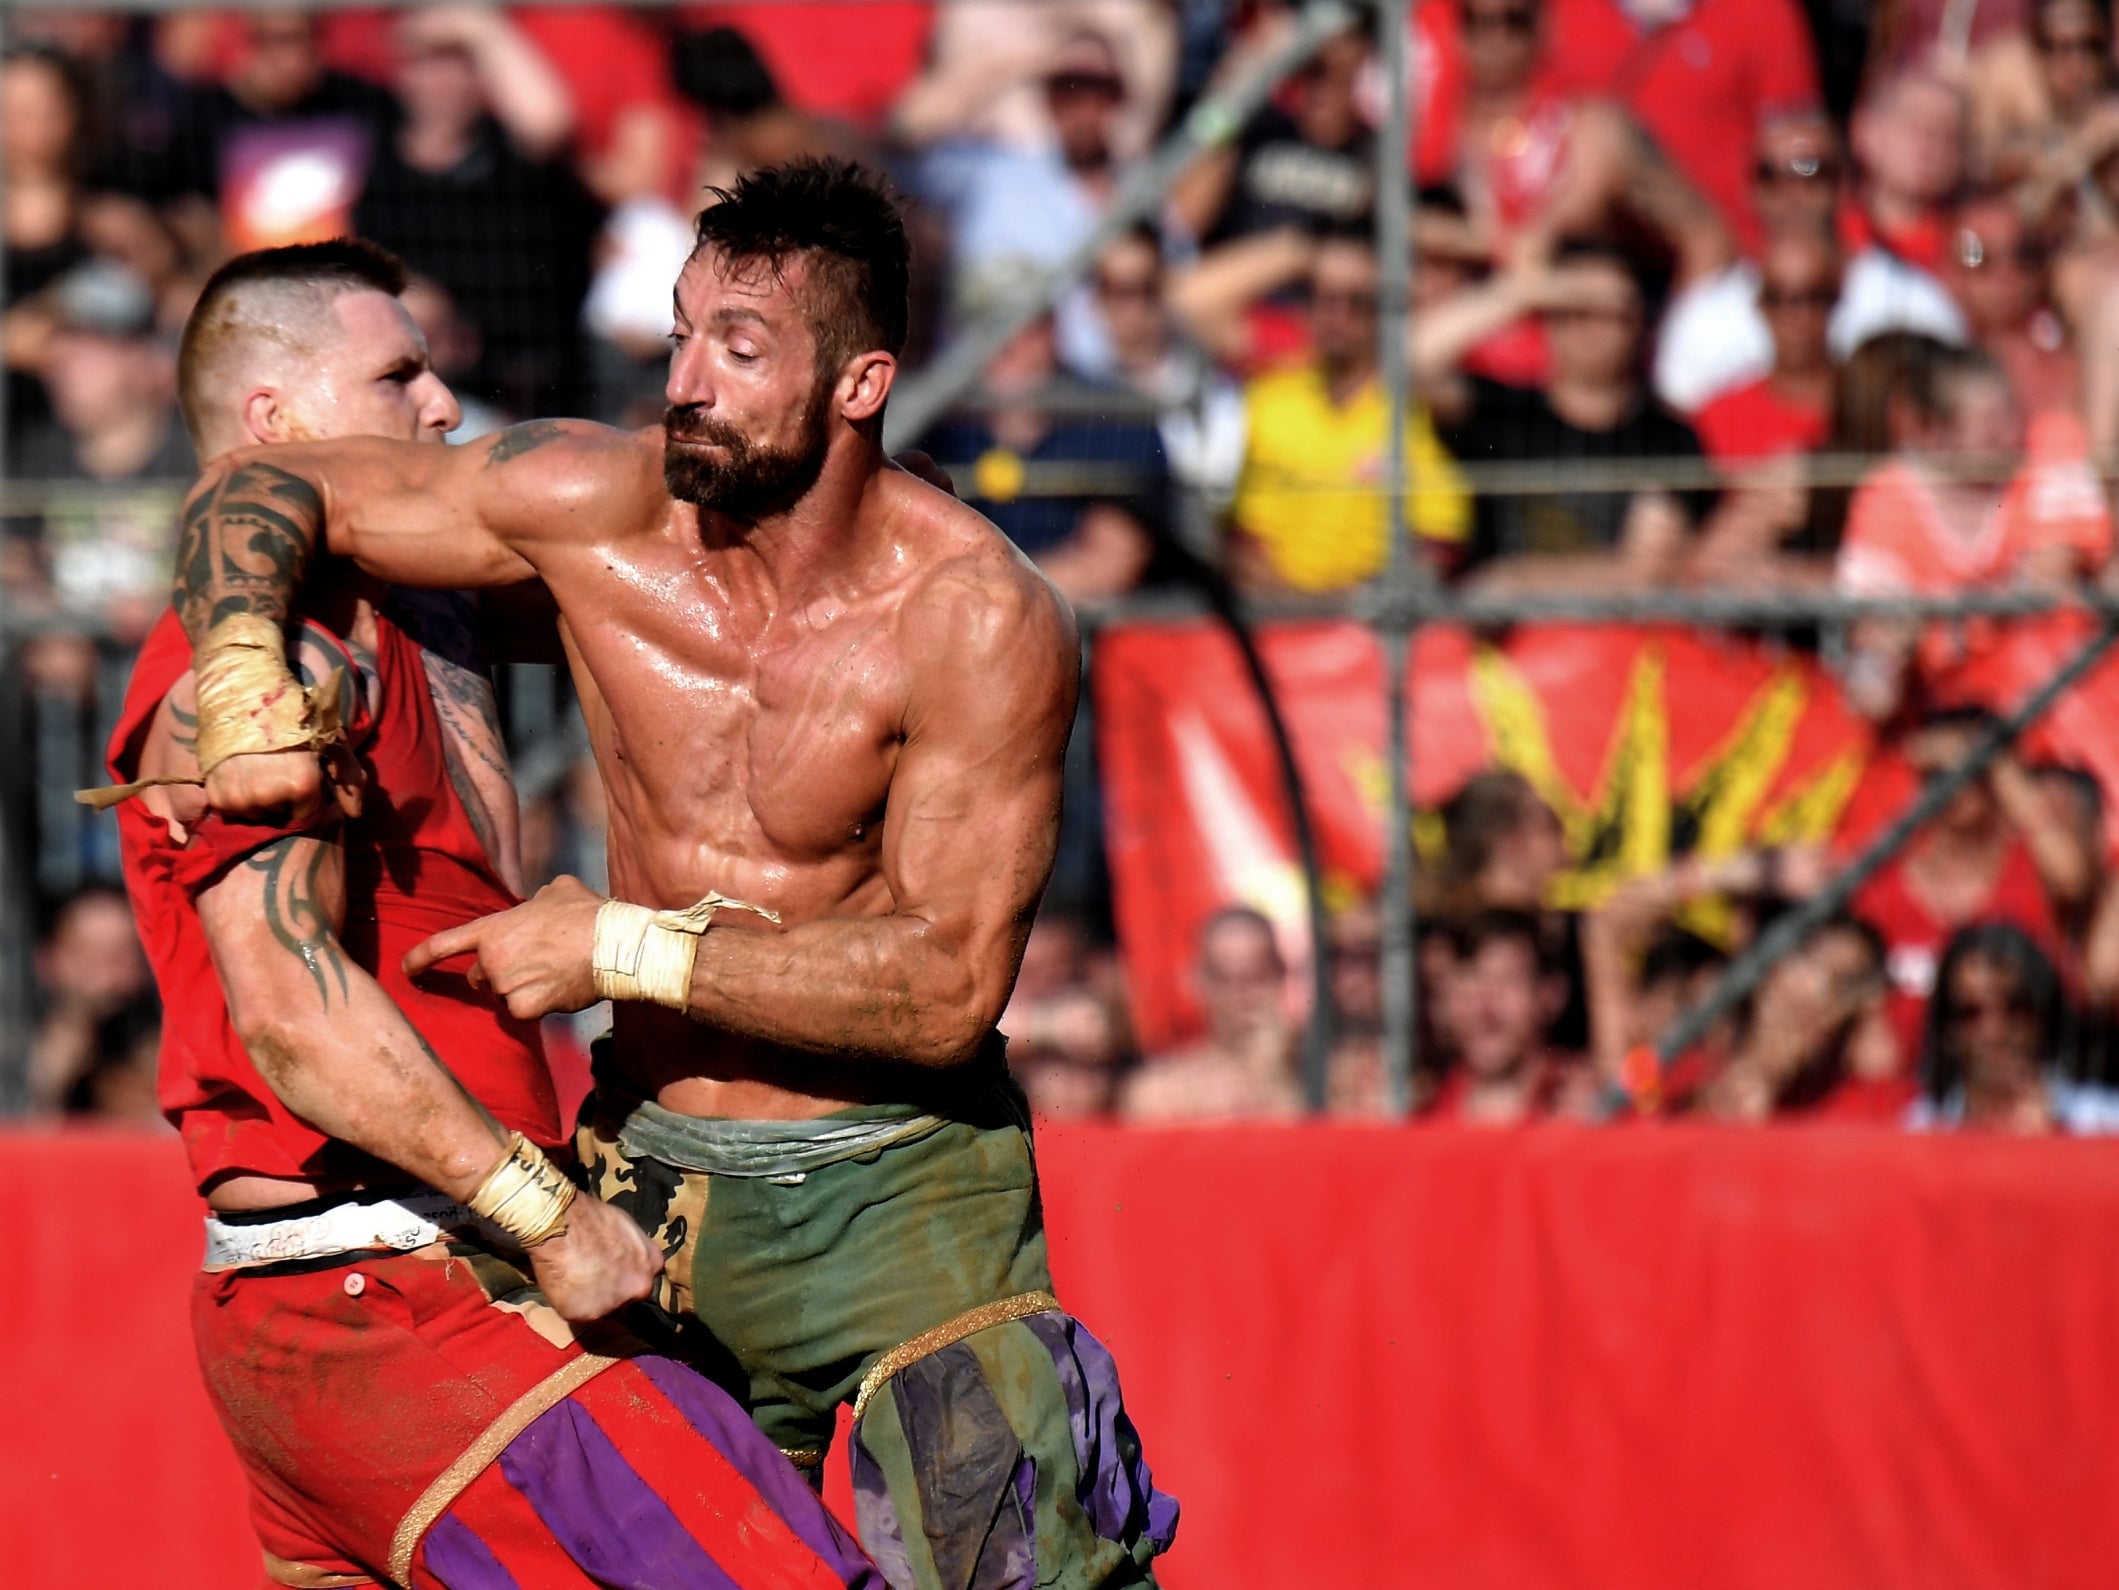 Calcio storico fiorentino players get to grips with each other while competing on the Piazza Santa Croce, Florence